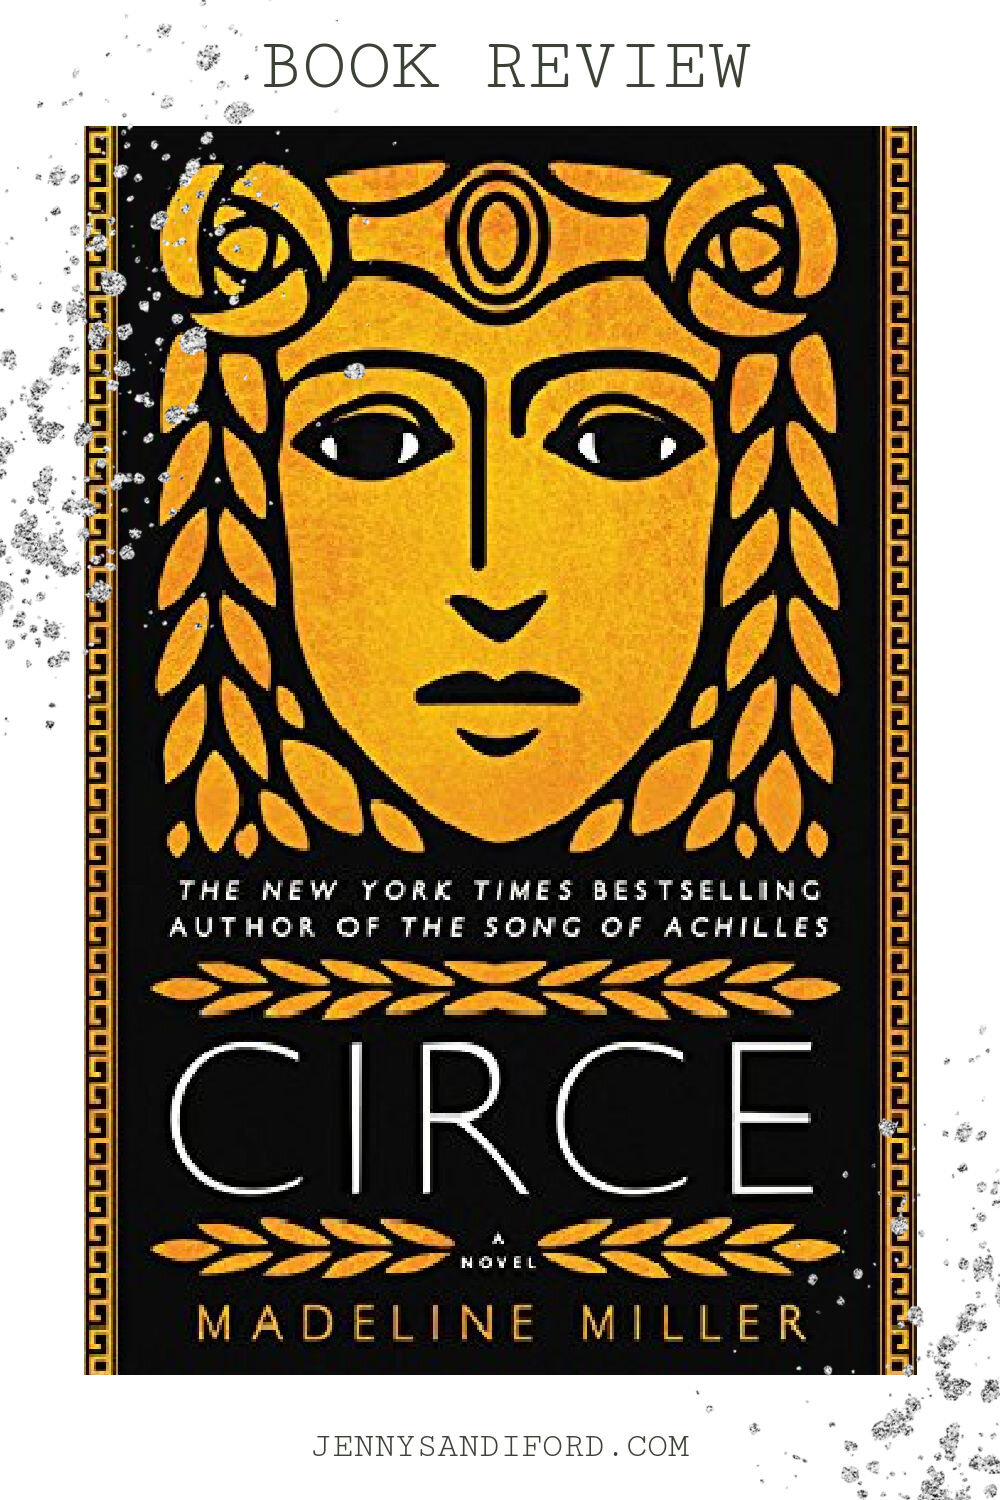 Circe by Madeline Miller book review. Jenny Sandiford